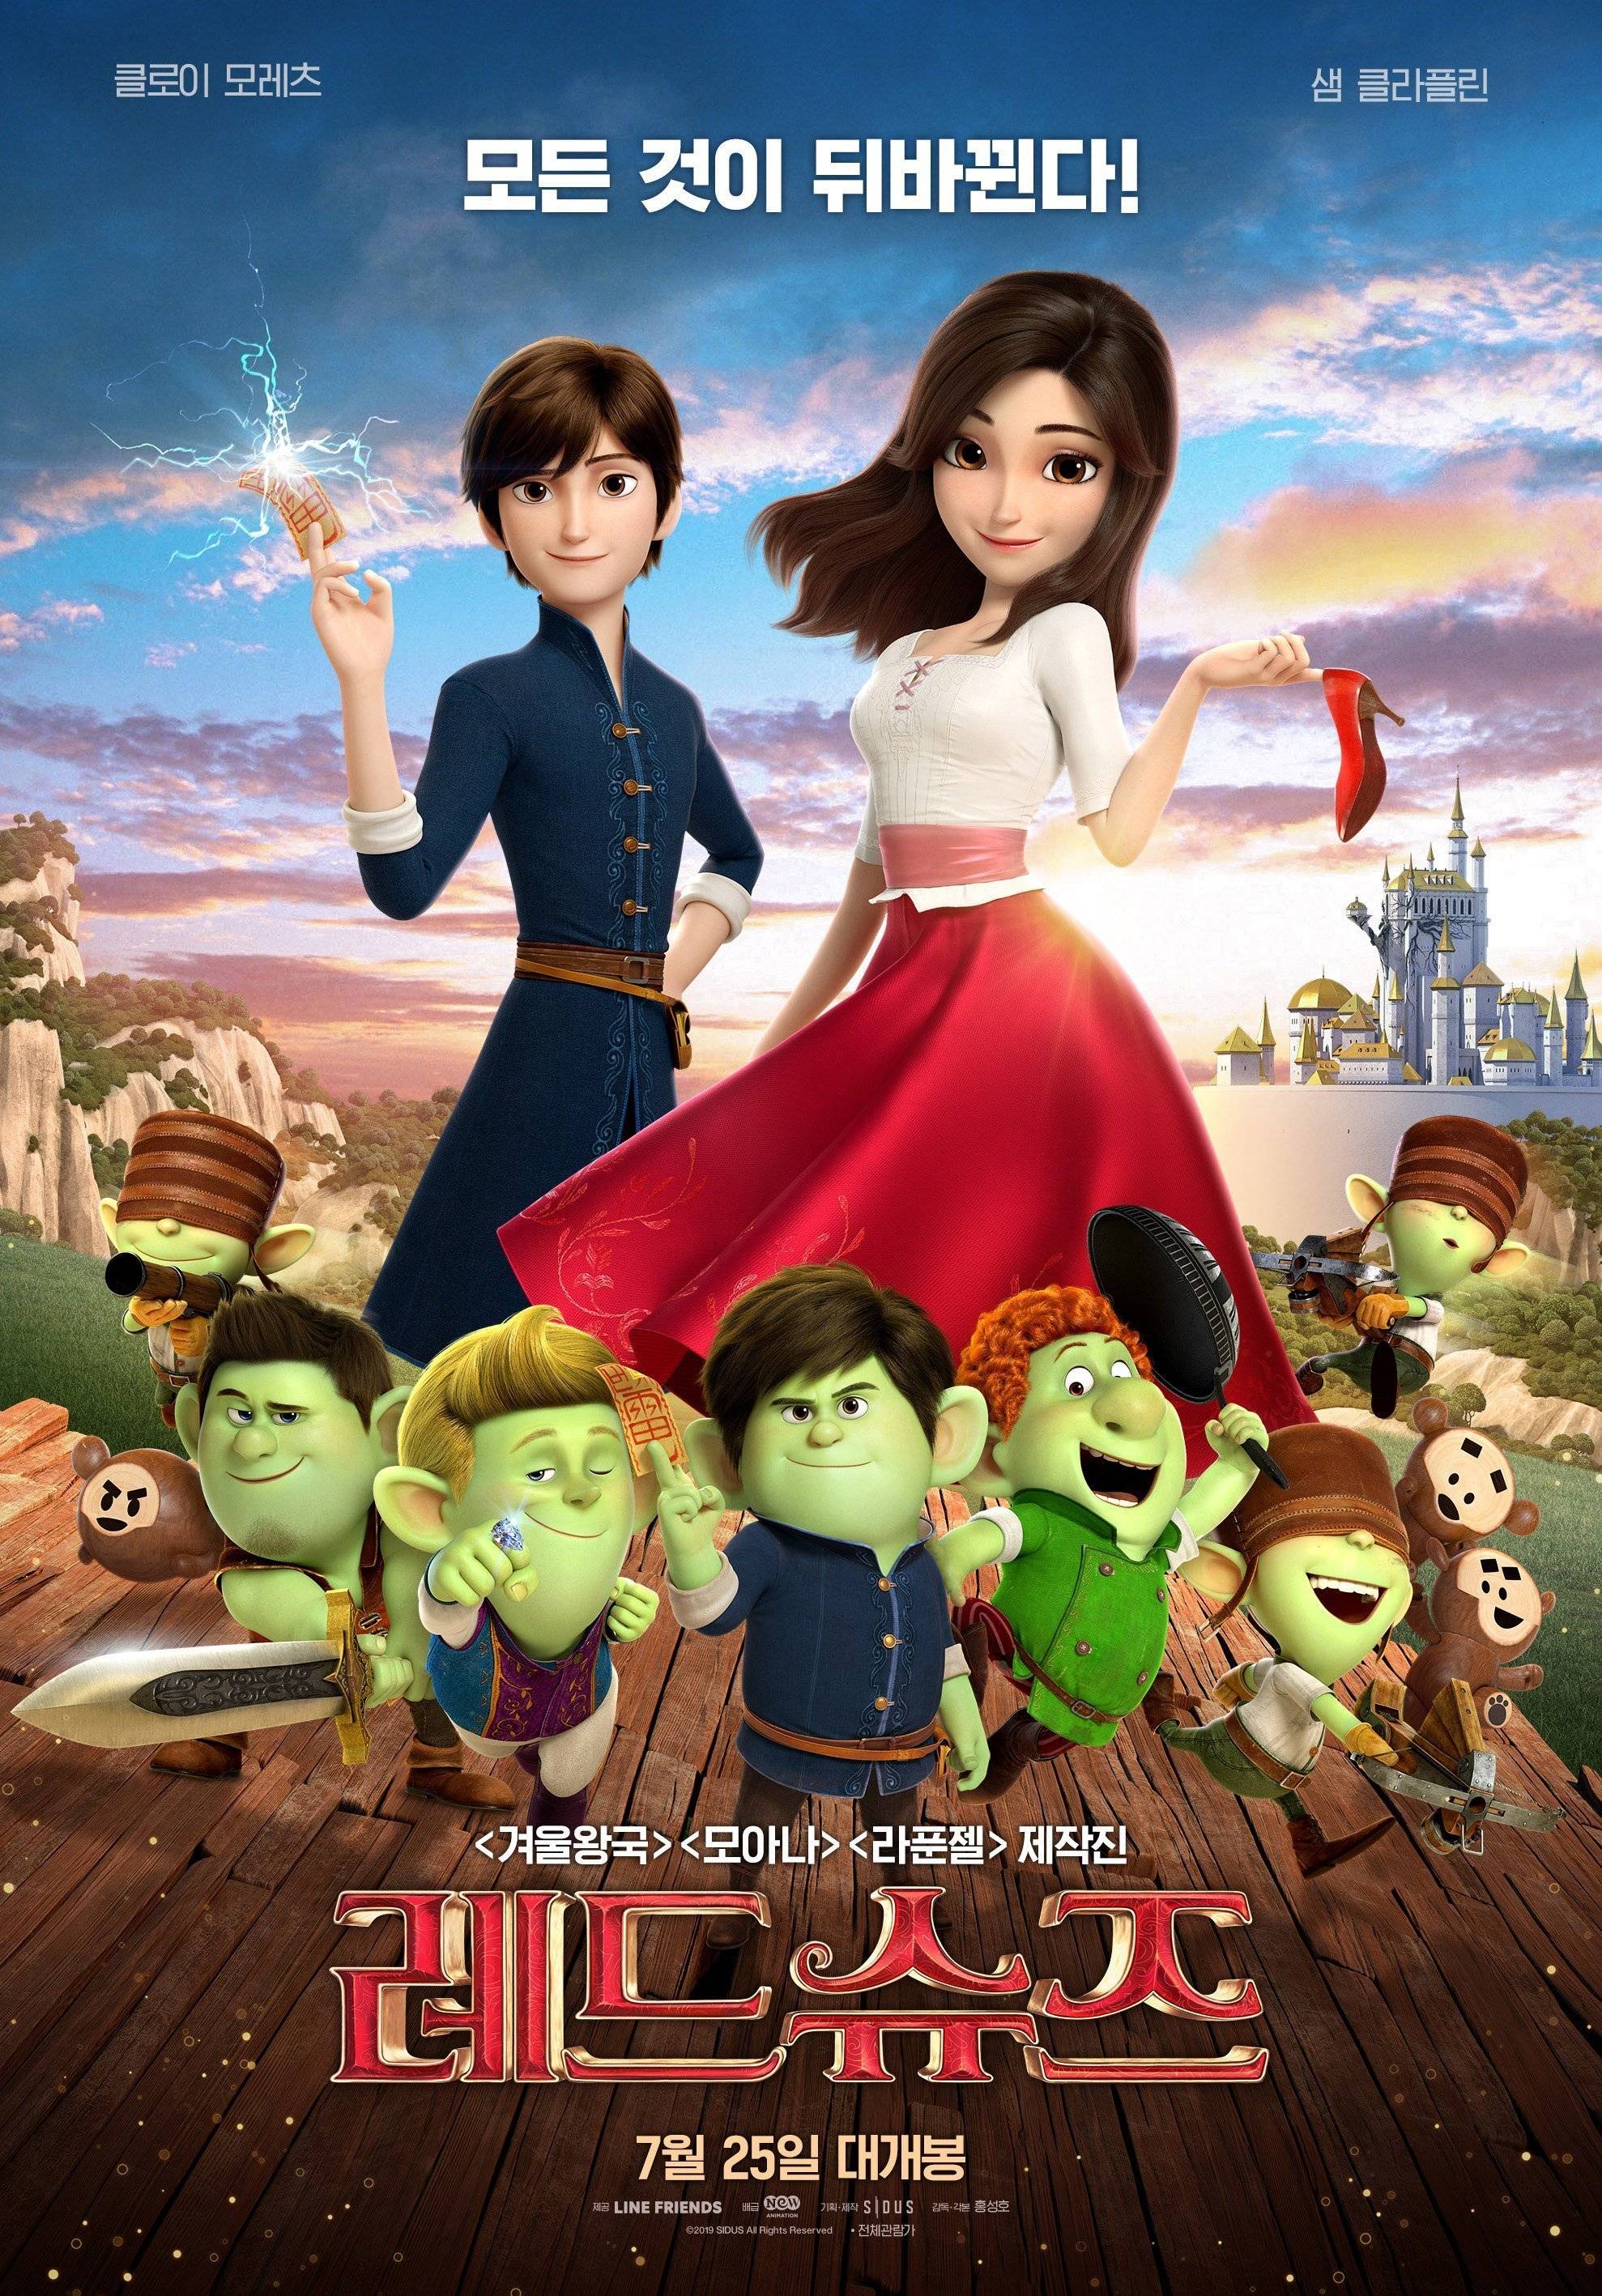 HanCinemas News Red Shoes and the Seven Dwarfs Released on South Korean on Demand Services HanCinema